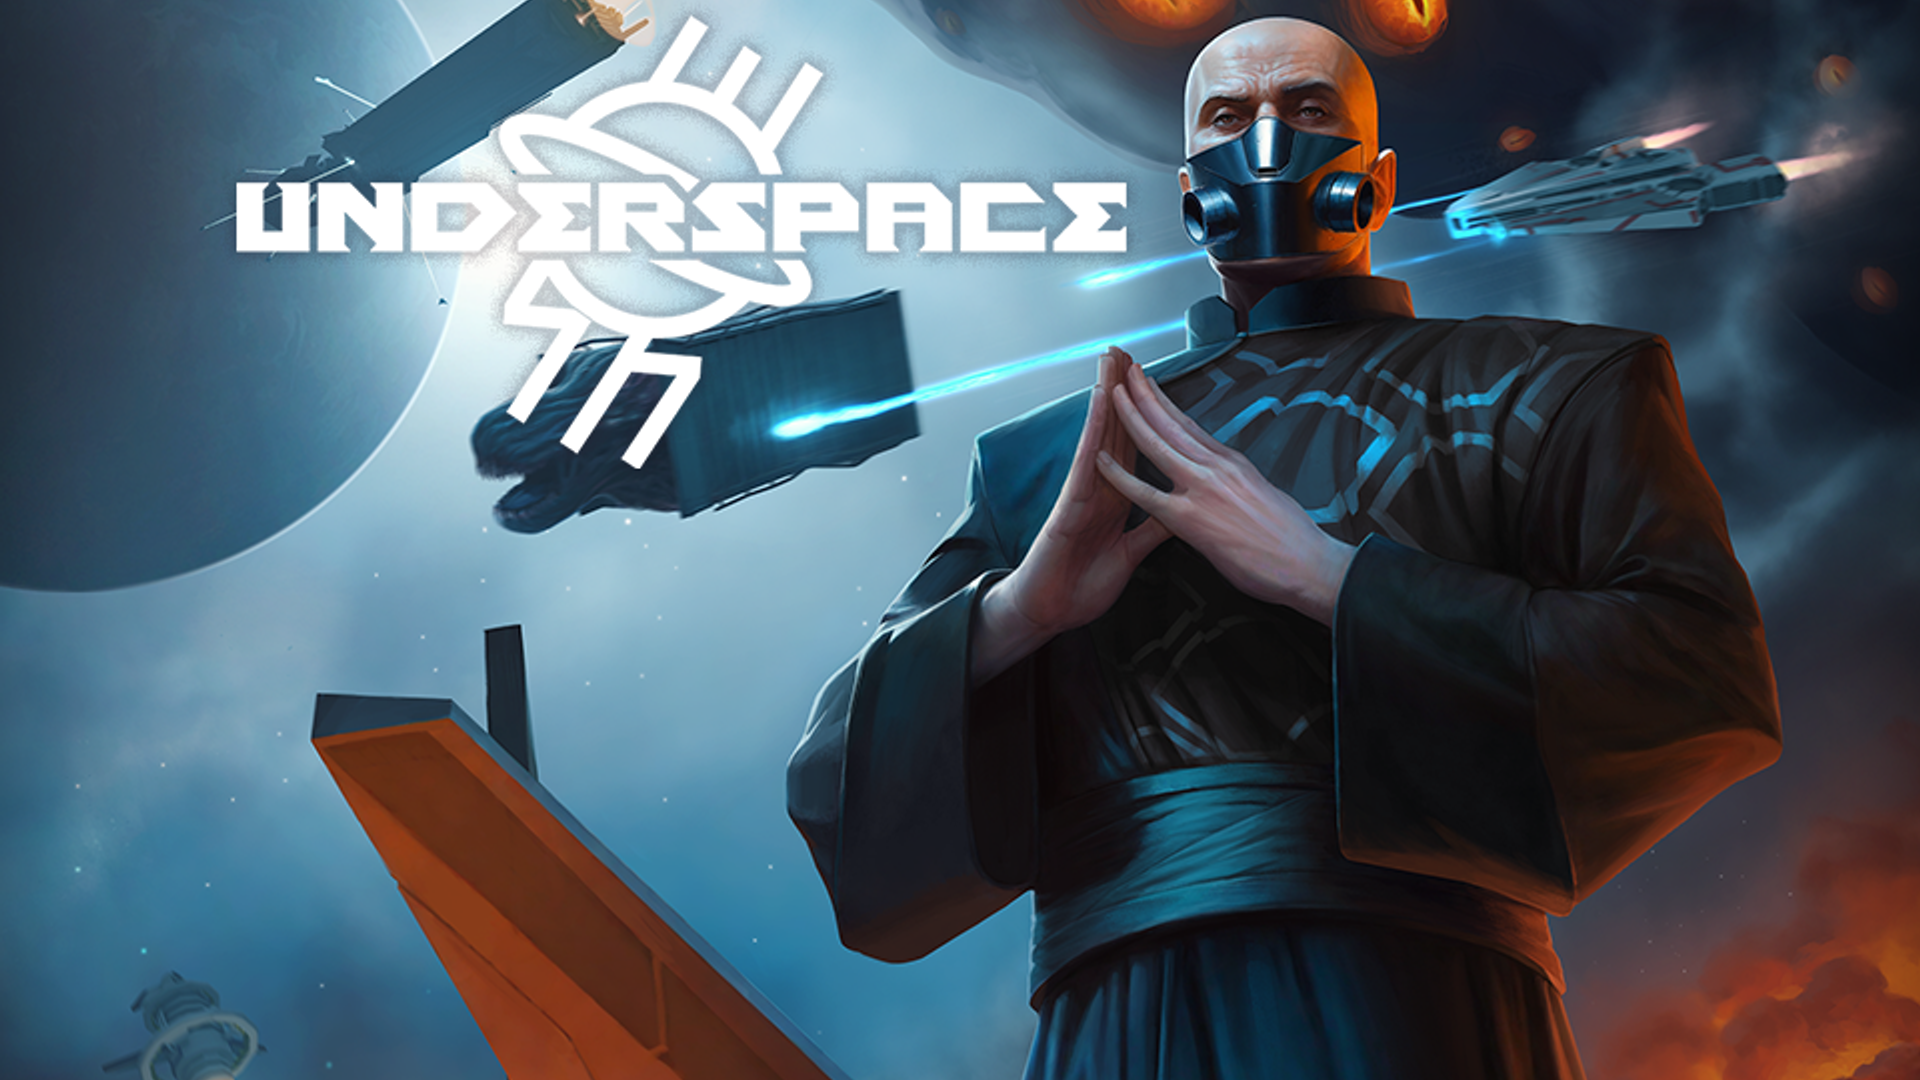 Underspace earlyaccesspreview thumb bg